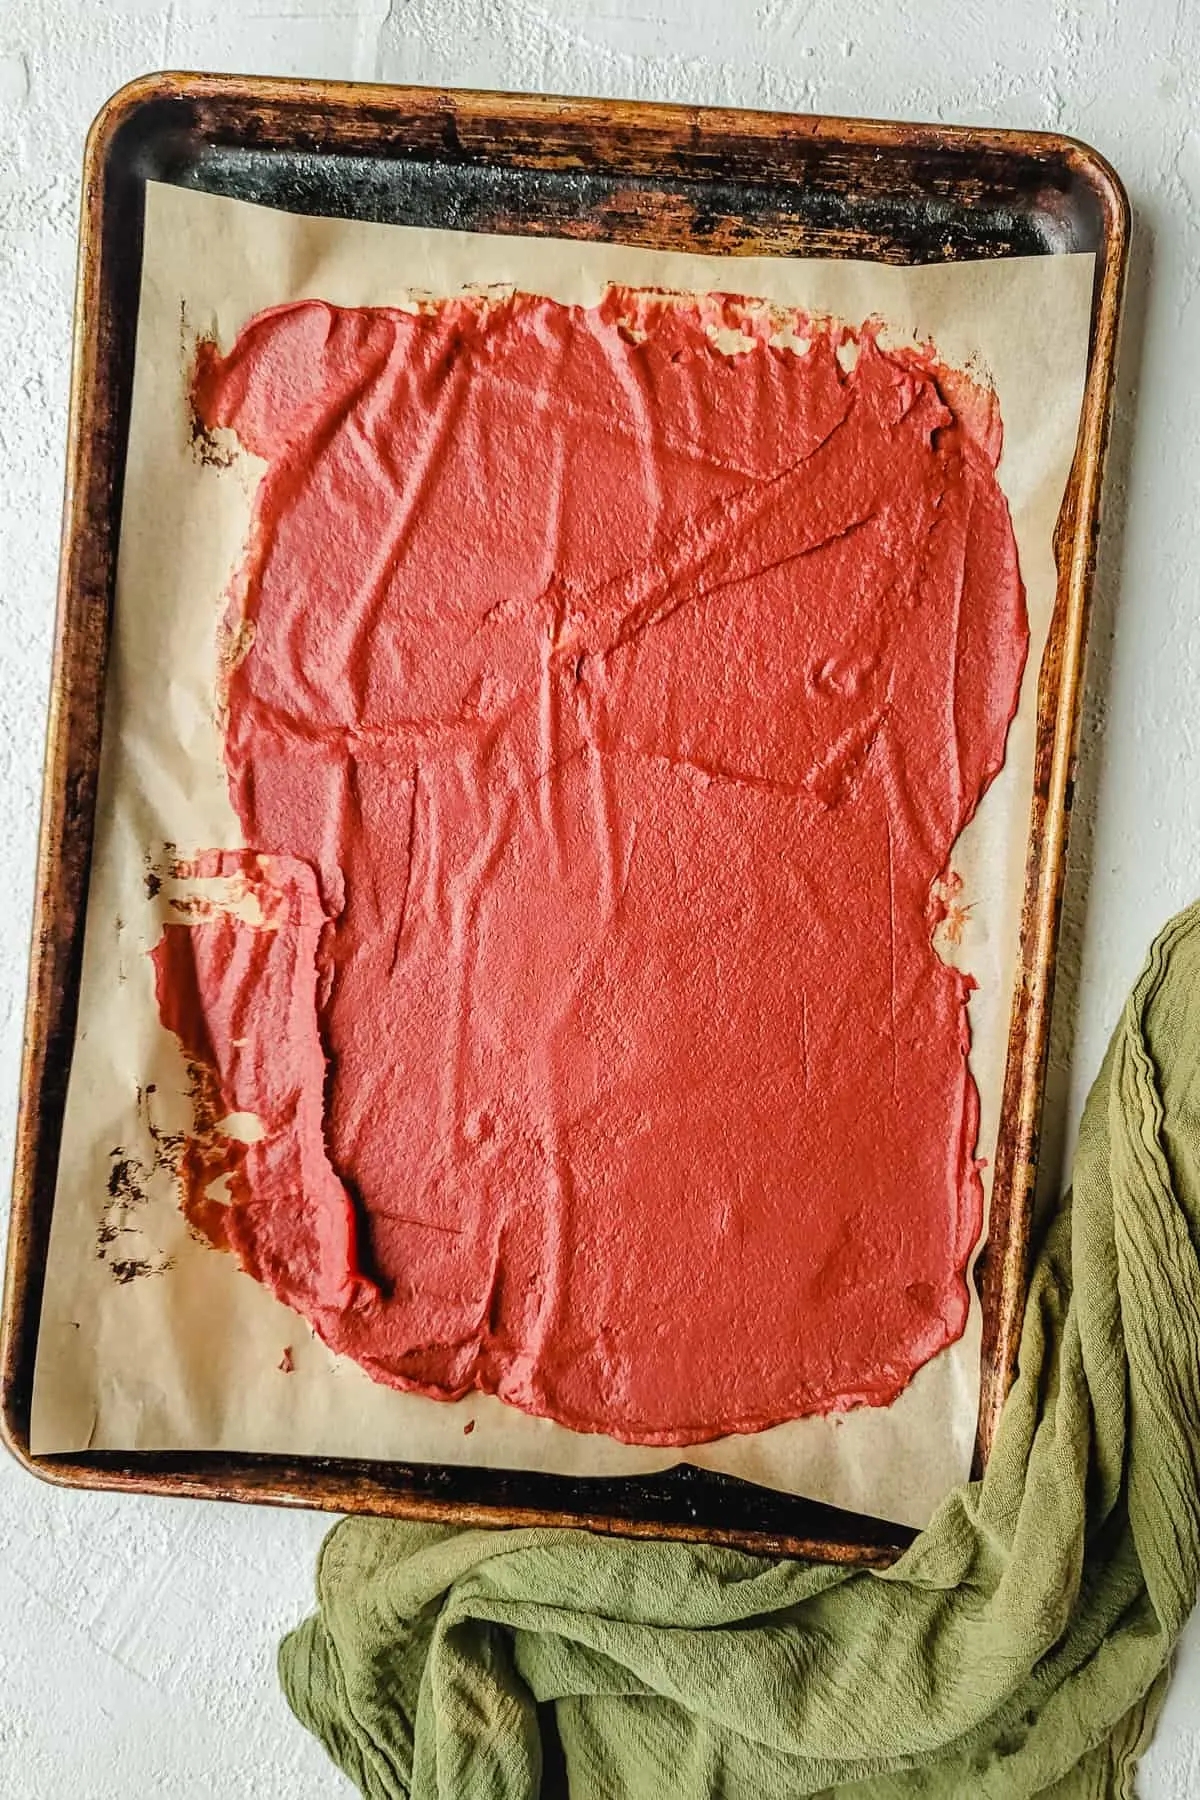 A baking sheet with tomato paste spread over it.